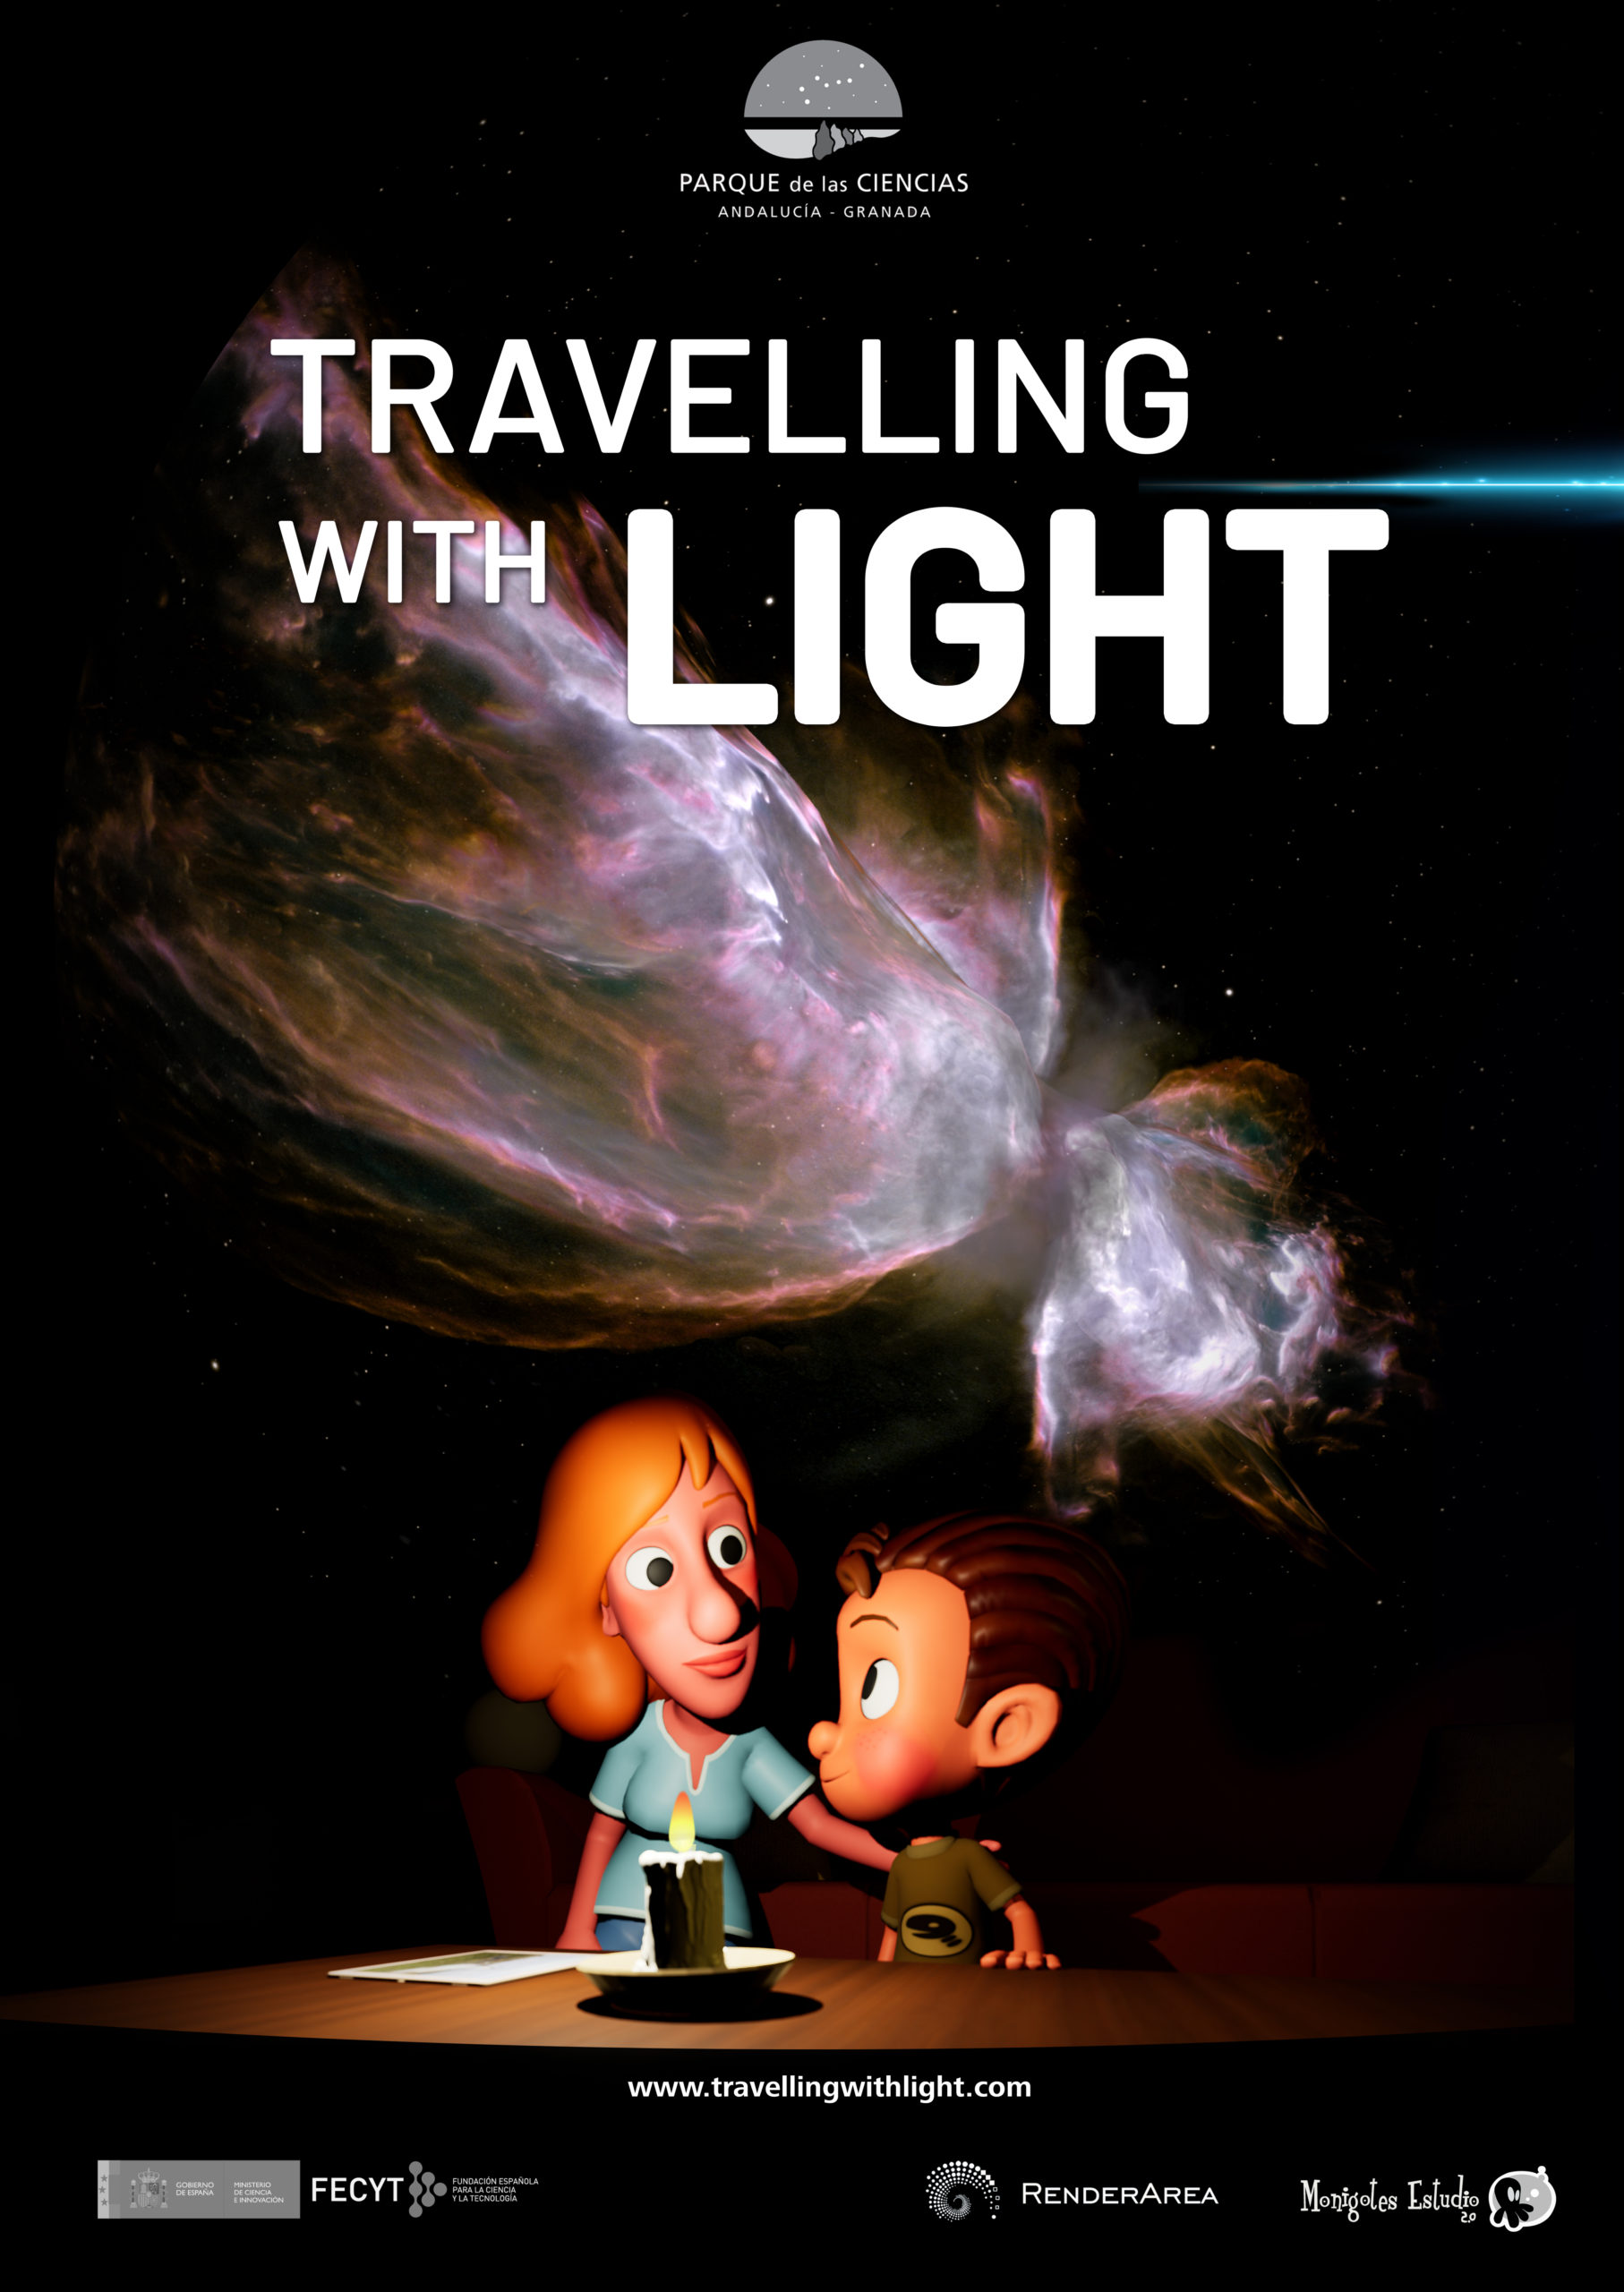 Travelling with light